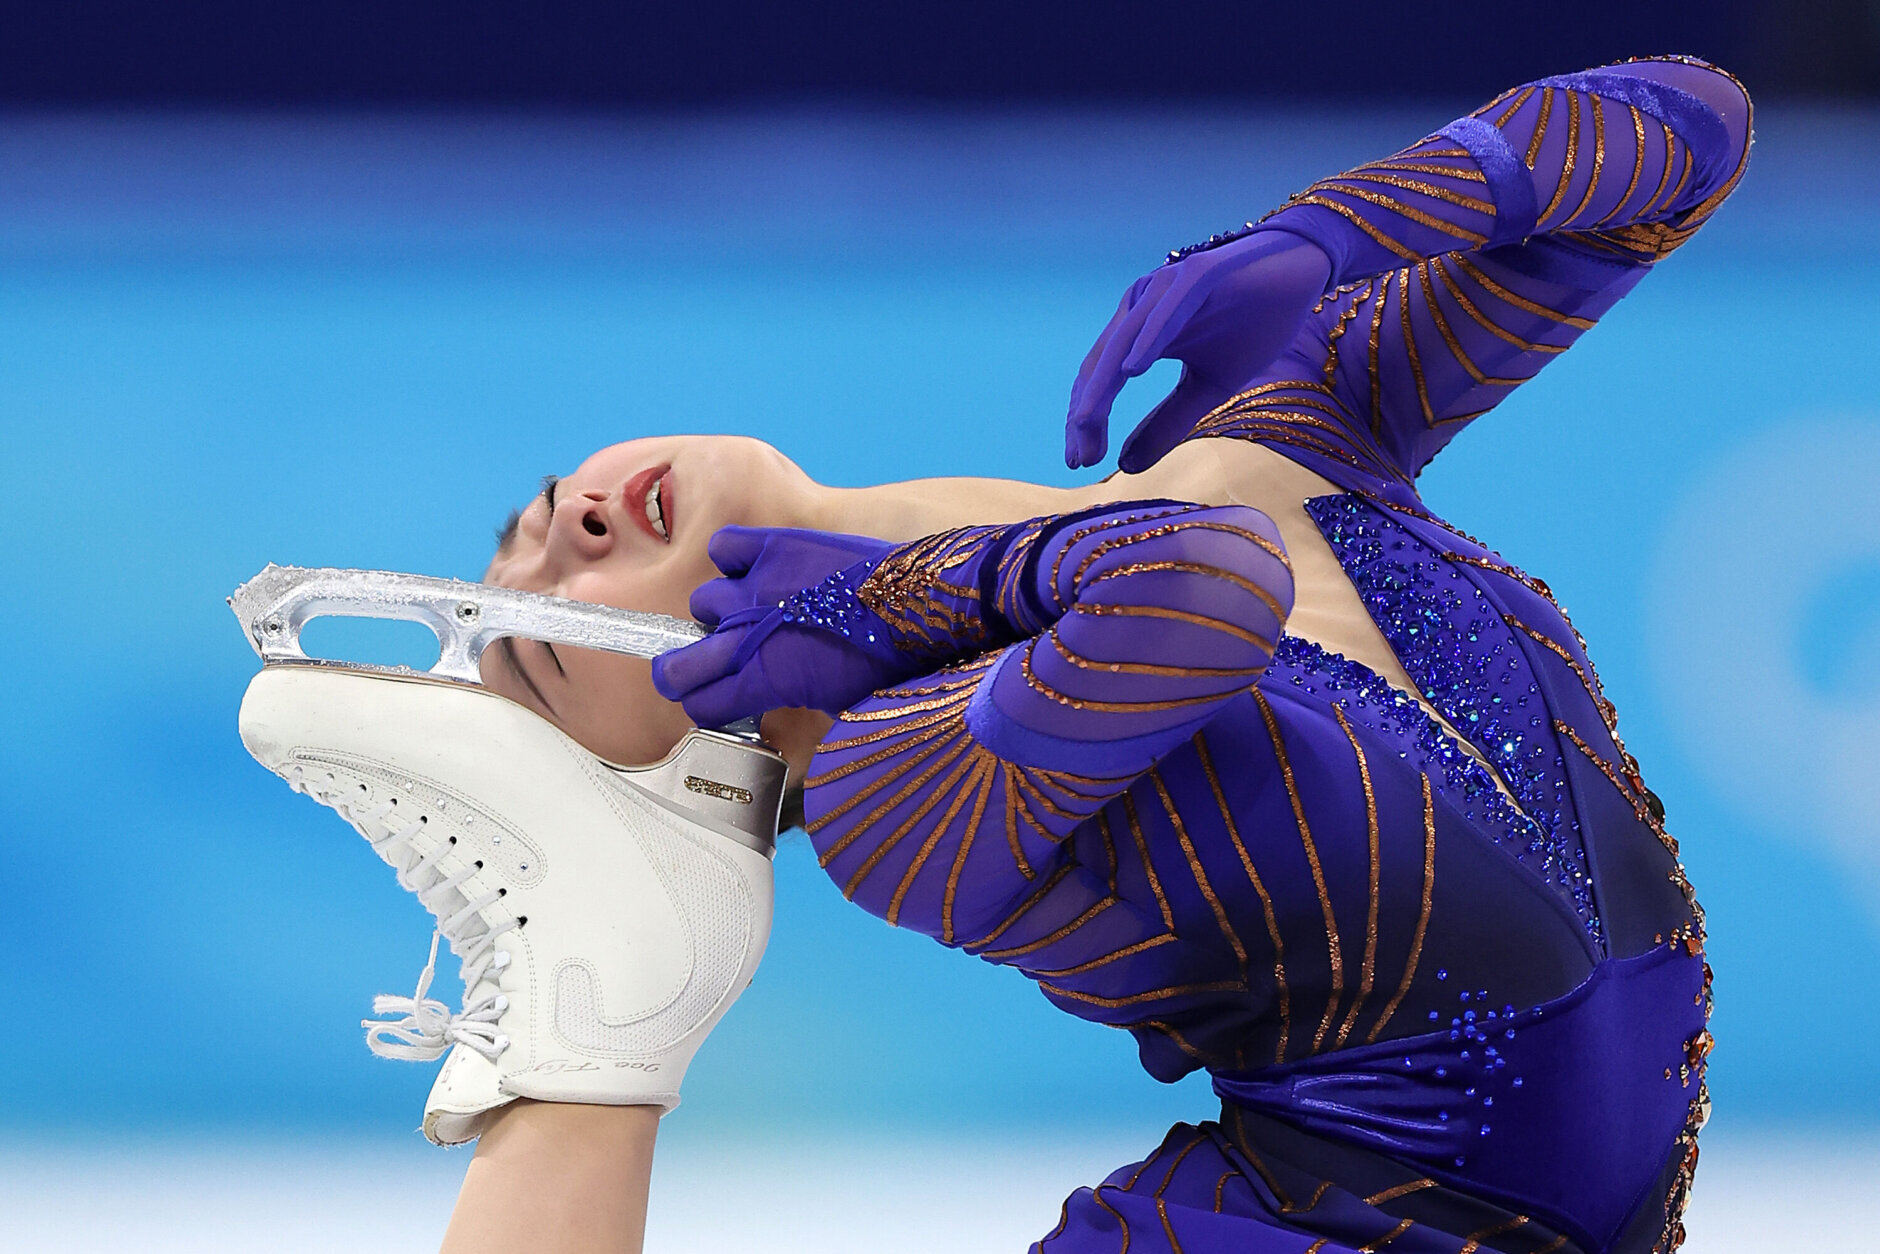 BEIJING, CHINA - FEBRUARY 17: Kaori Sakamoto of Team Japan skates during the Women Single Skating Free Skating on day thirteen of the Beijing 2022 Winter Olympic Games at Capital Indoor Stadium on February 17, 2022 in Beijing, China. (Photo by Matthew Stockman/Getty Images)